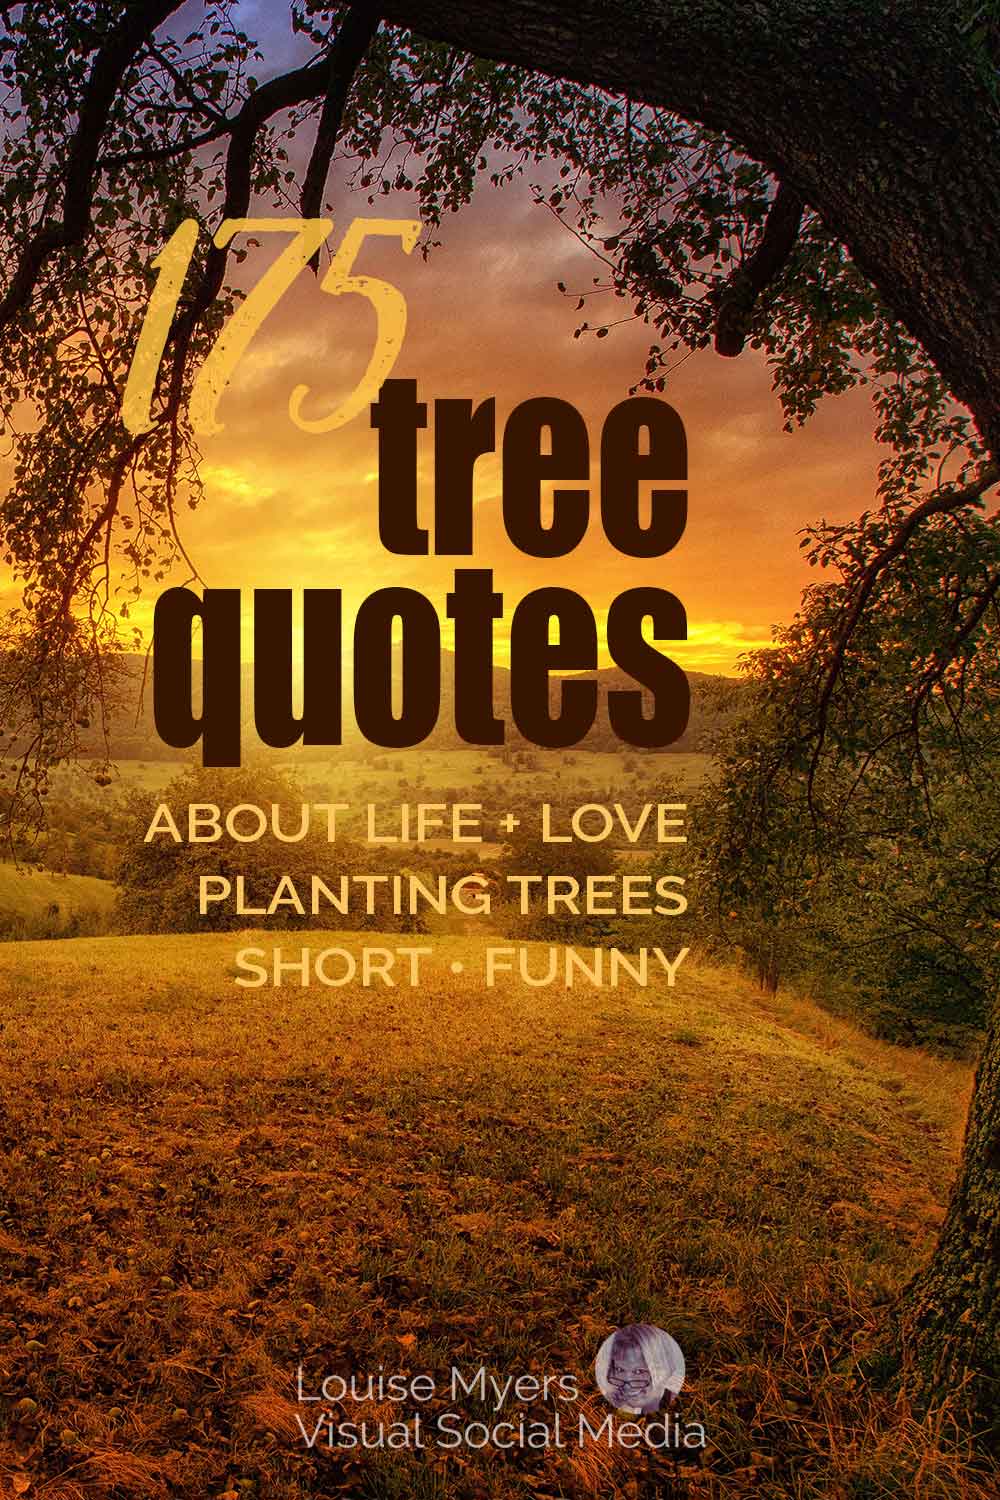 sunset through tree boughs with words, 175 tree quotes about life and love, planting trees, short, funny.